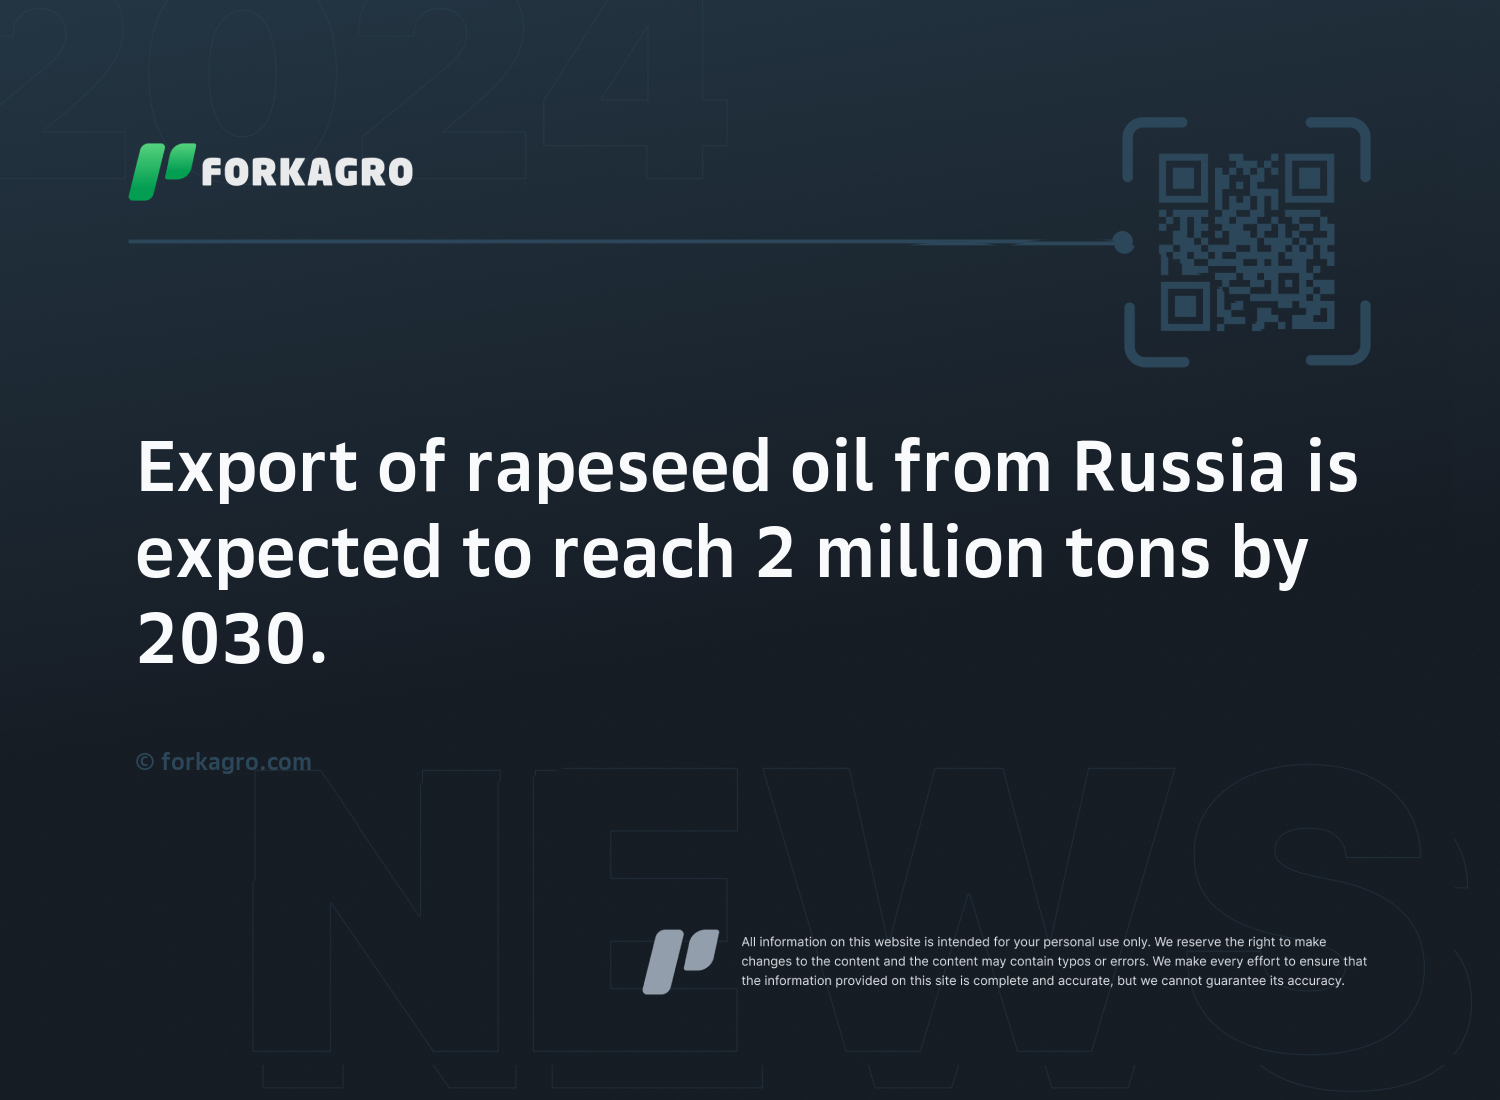 Export of rapeseed oil from Russia is expected to reach 2 million tons by 2030.